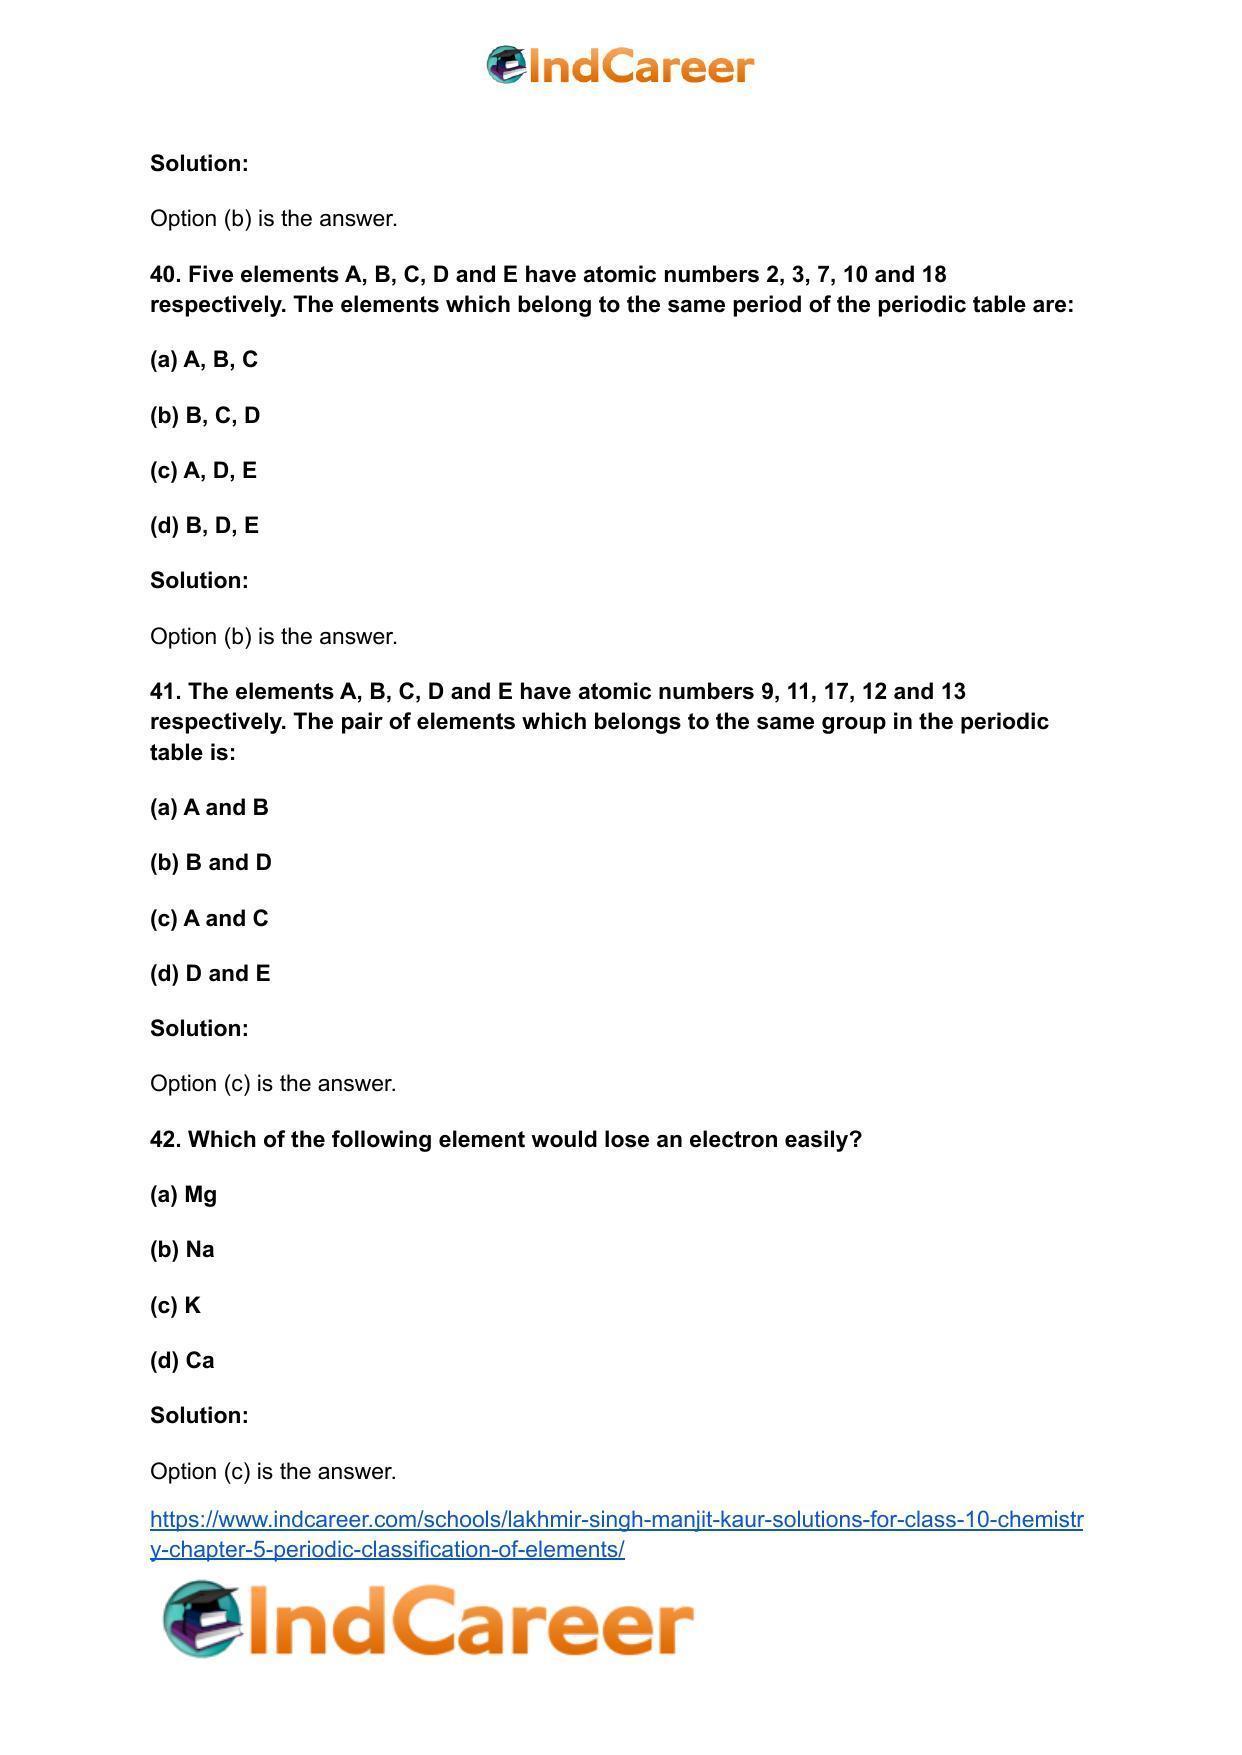 Lakhmir Singh Manjit Kaur  Solutions for Class 10 Chemistry: Chapter 5- Periodic Classification Of Elements - Page 31